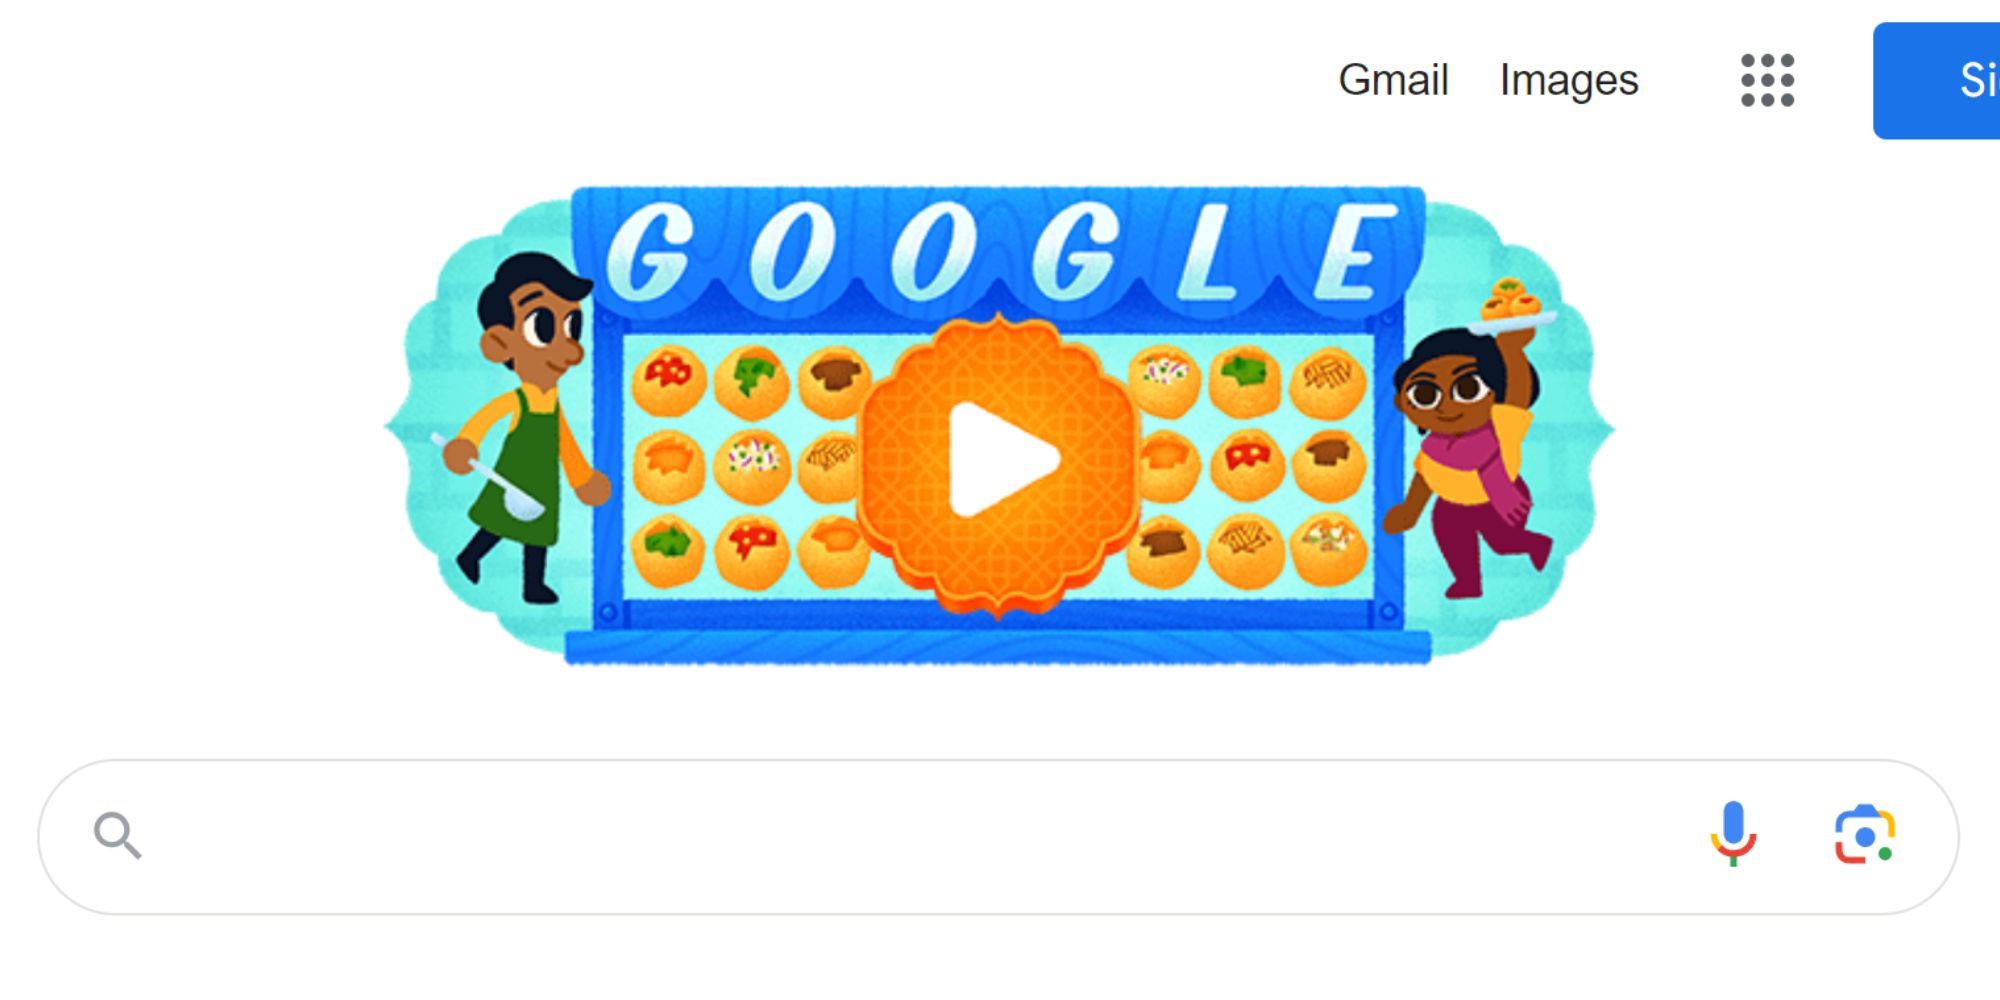 How To Play The Google Doodle Pani Puri Game